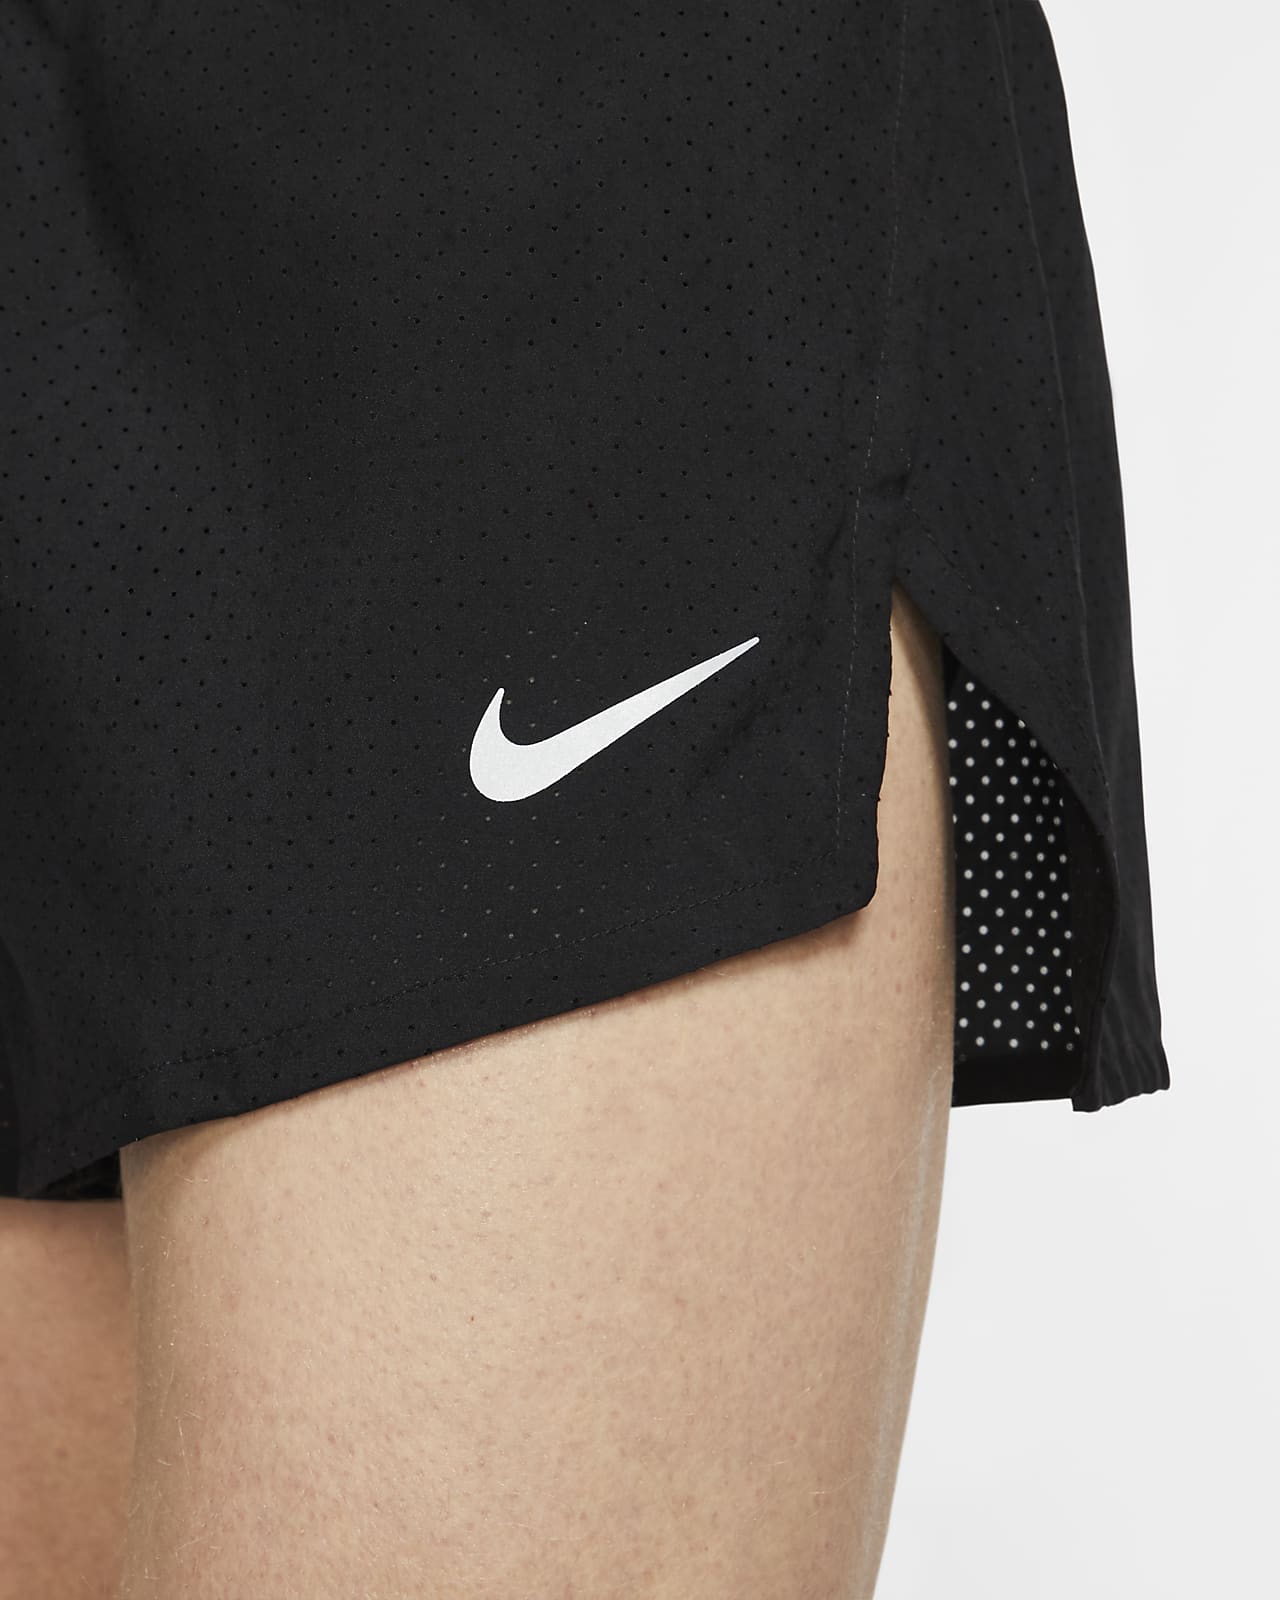 Nike Mens Tempo Split 2 Running Shorts with an internal brief